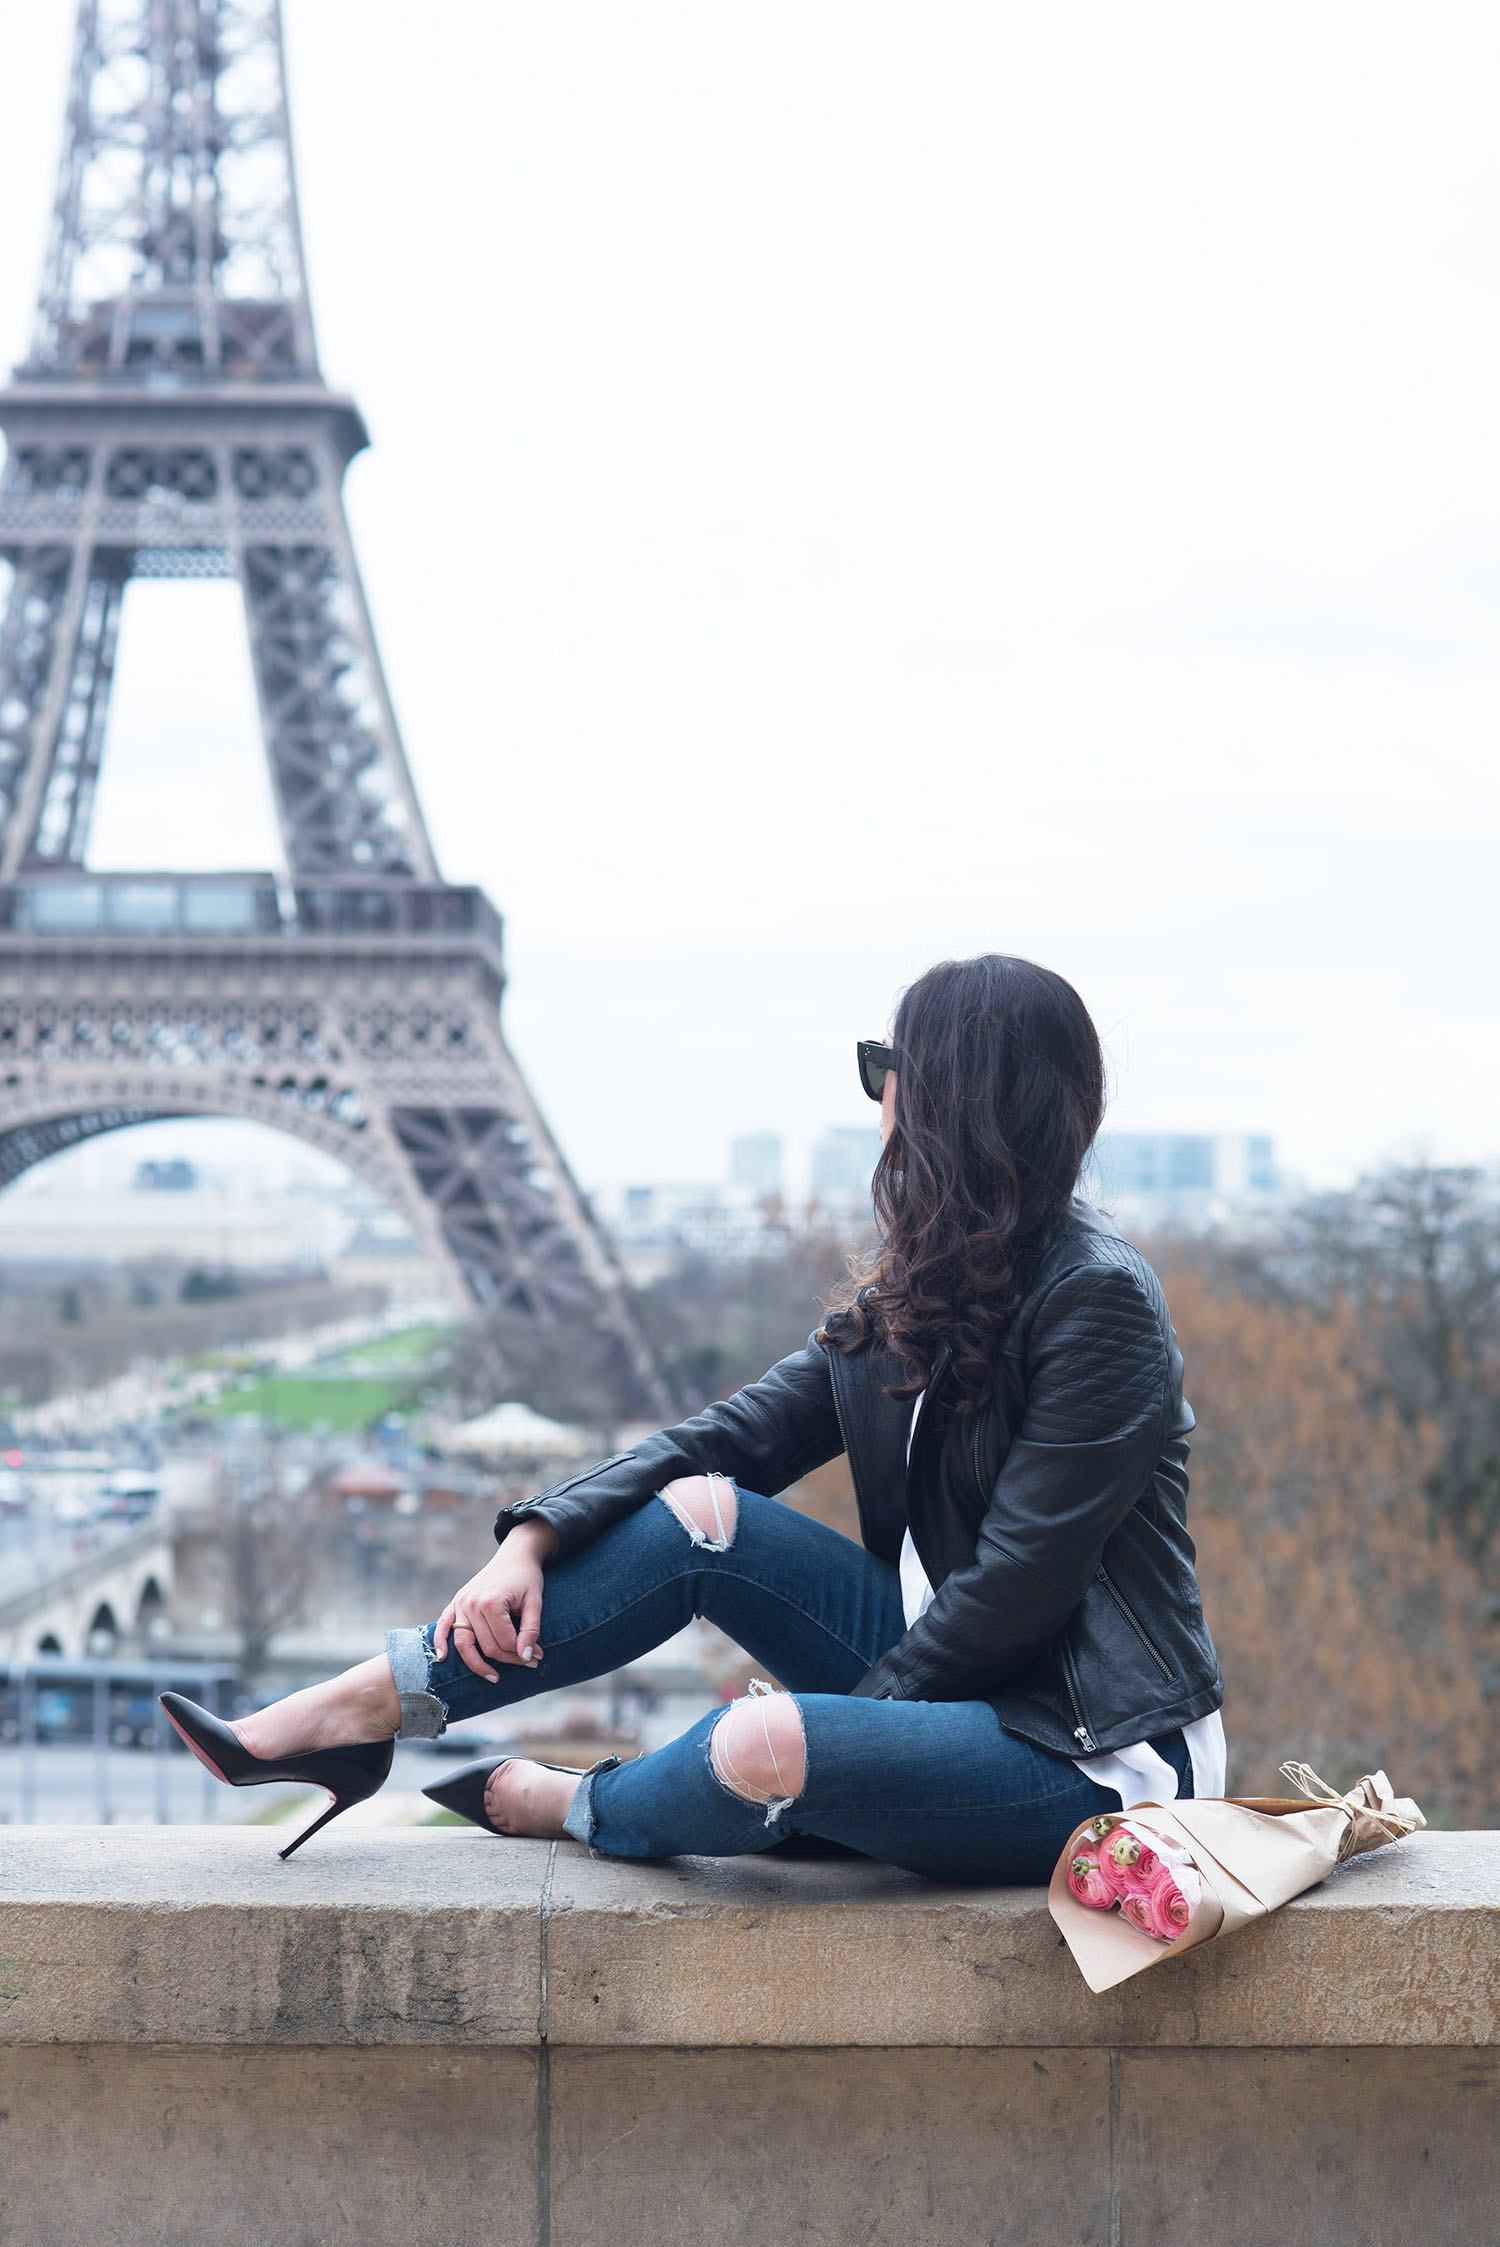 Fashion blogger Cee Fardoe of Coco & Vera sits at Place Trocadero in front of th Eiffel Tower wearing Paige Hoxton jeans and a Cupcakes and Cashmere leather jacket